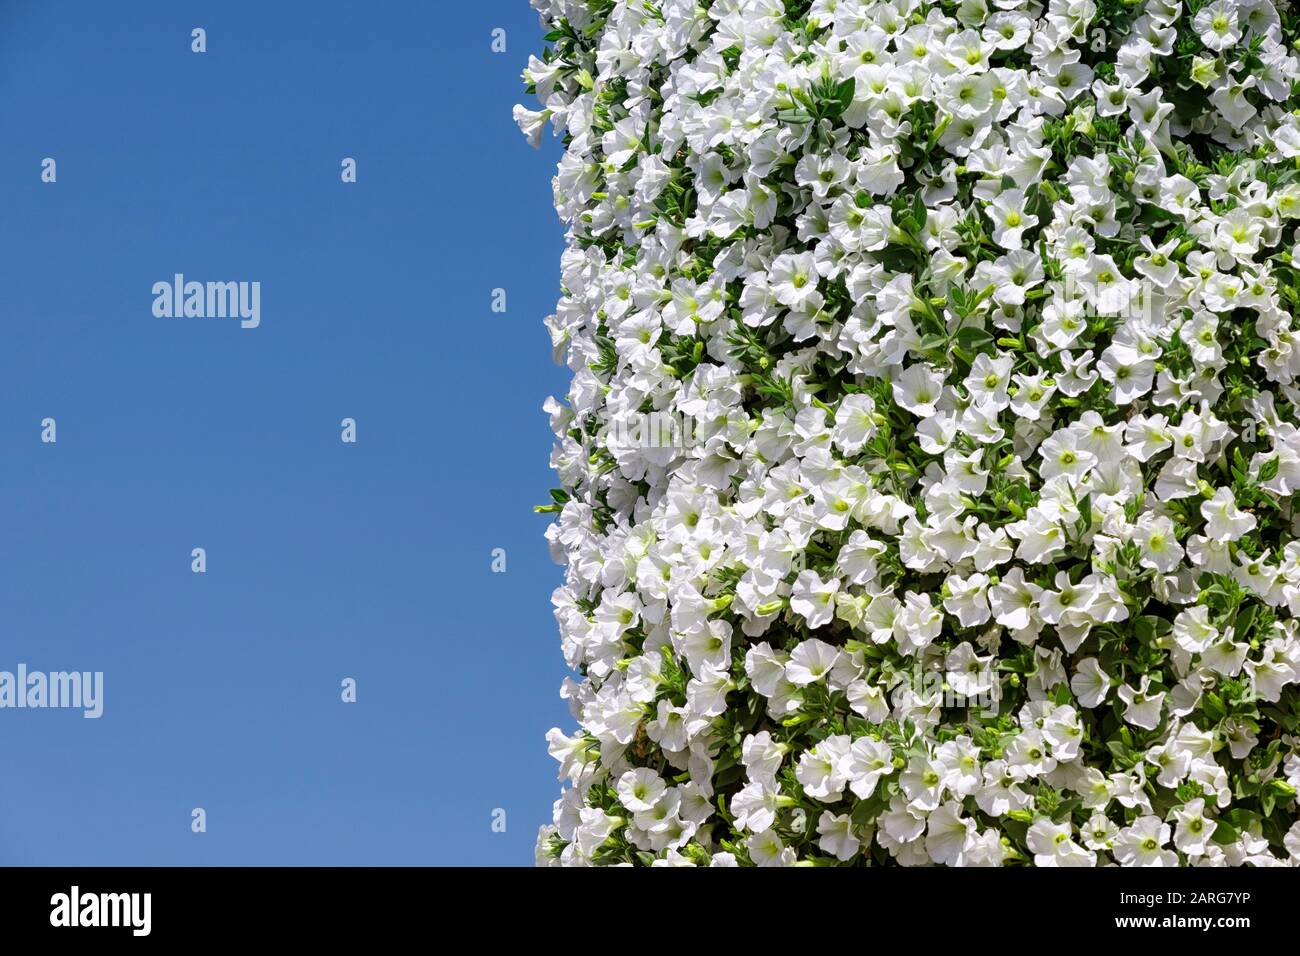 Blossoming beautiful flowers on a flat surface Stock Photo